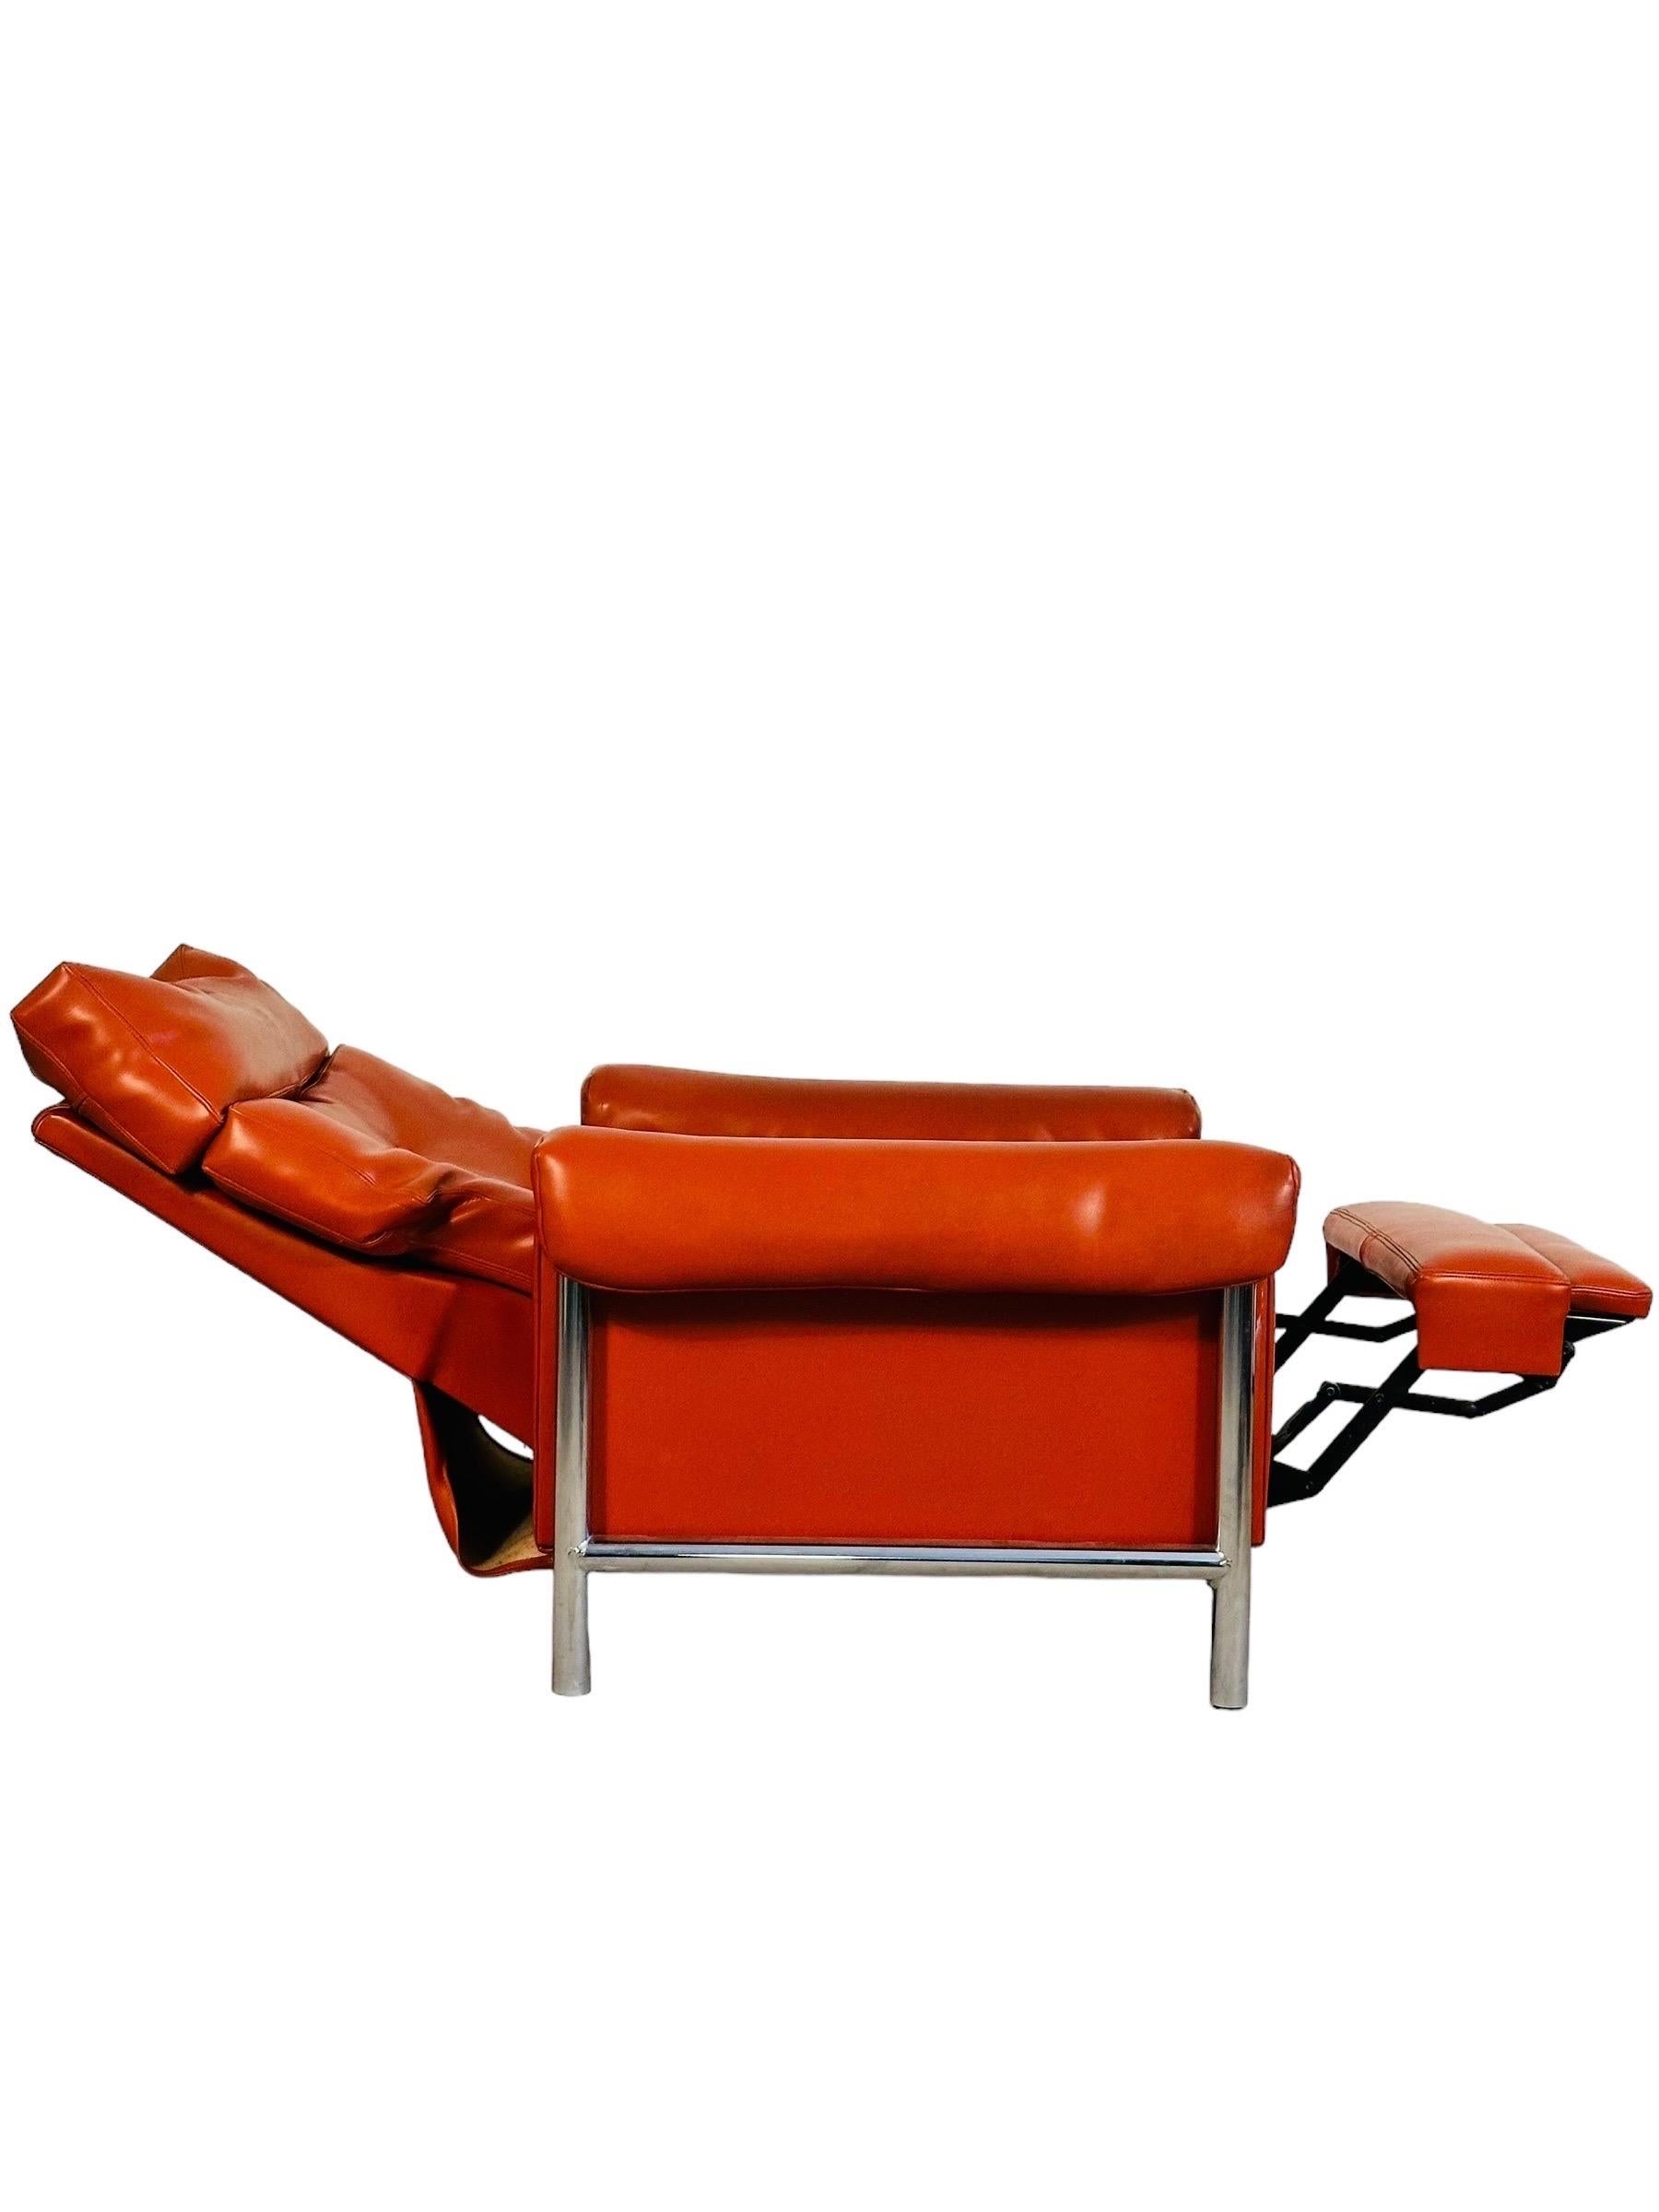 20th Century Mid Century Modern Chrome Recliner Lounge Chair For Sale